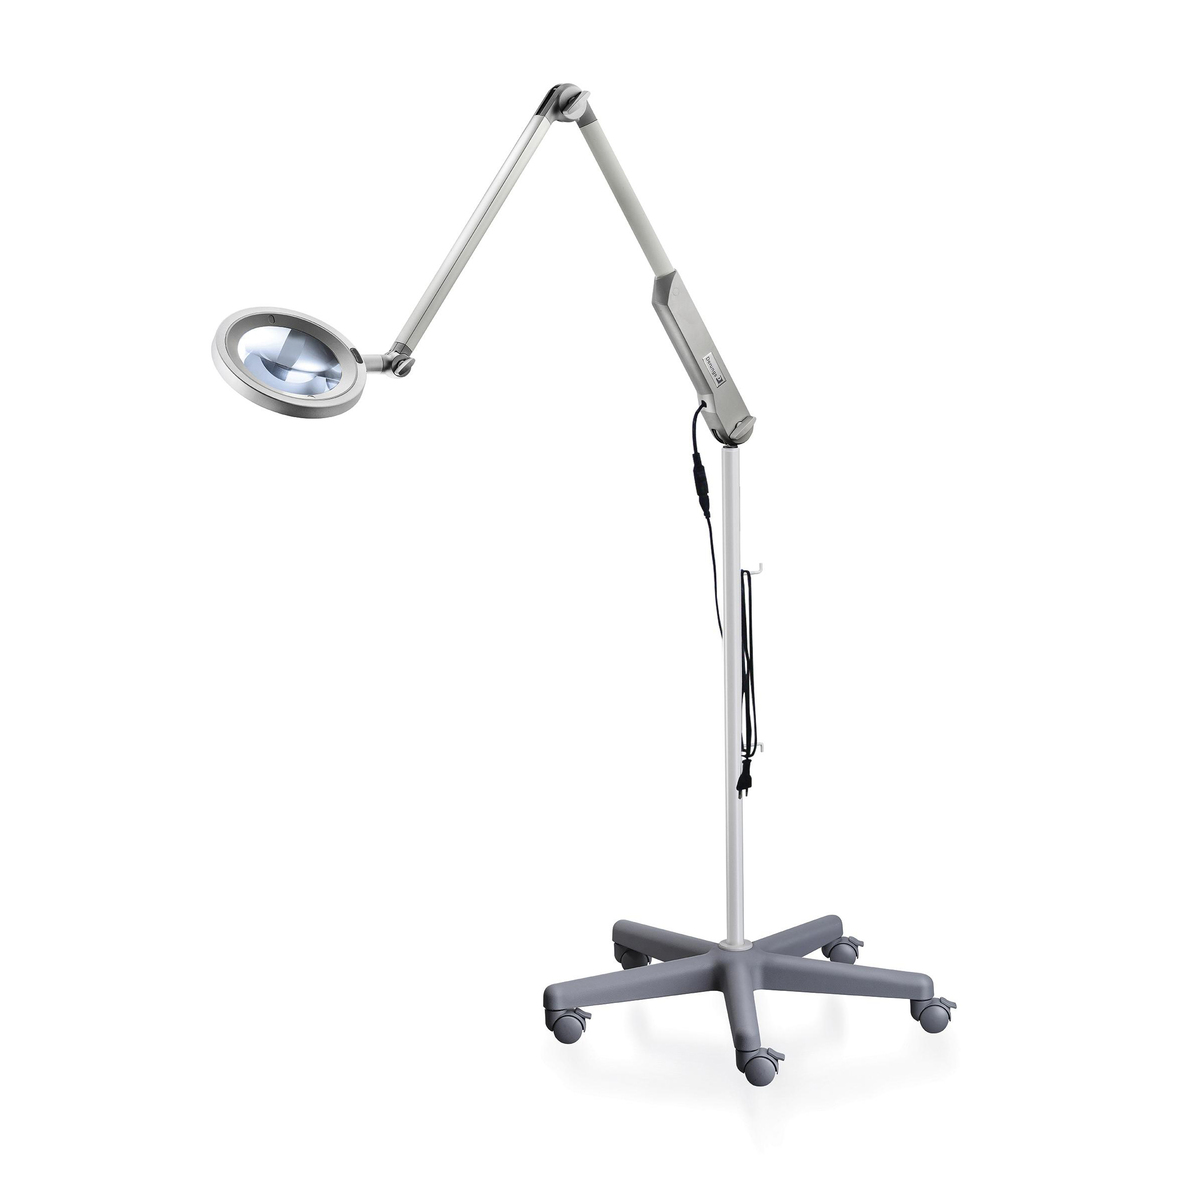 Hospital equipment led magnifier woods – floor stand shipped separately.